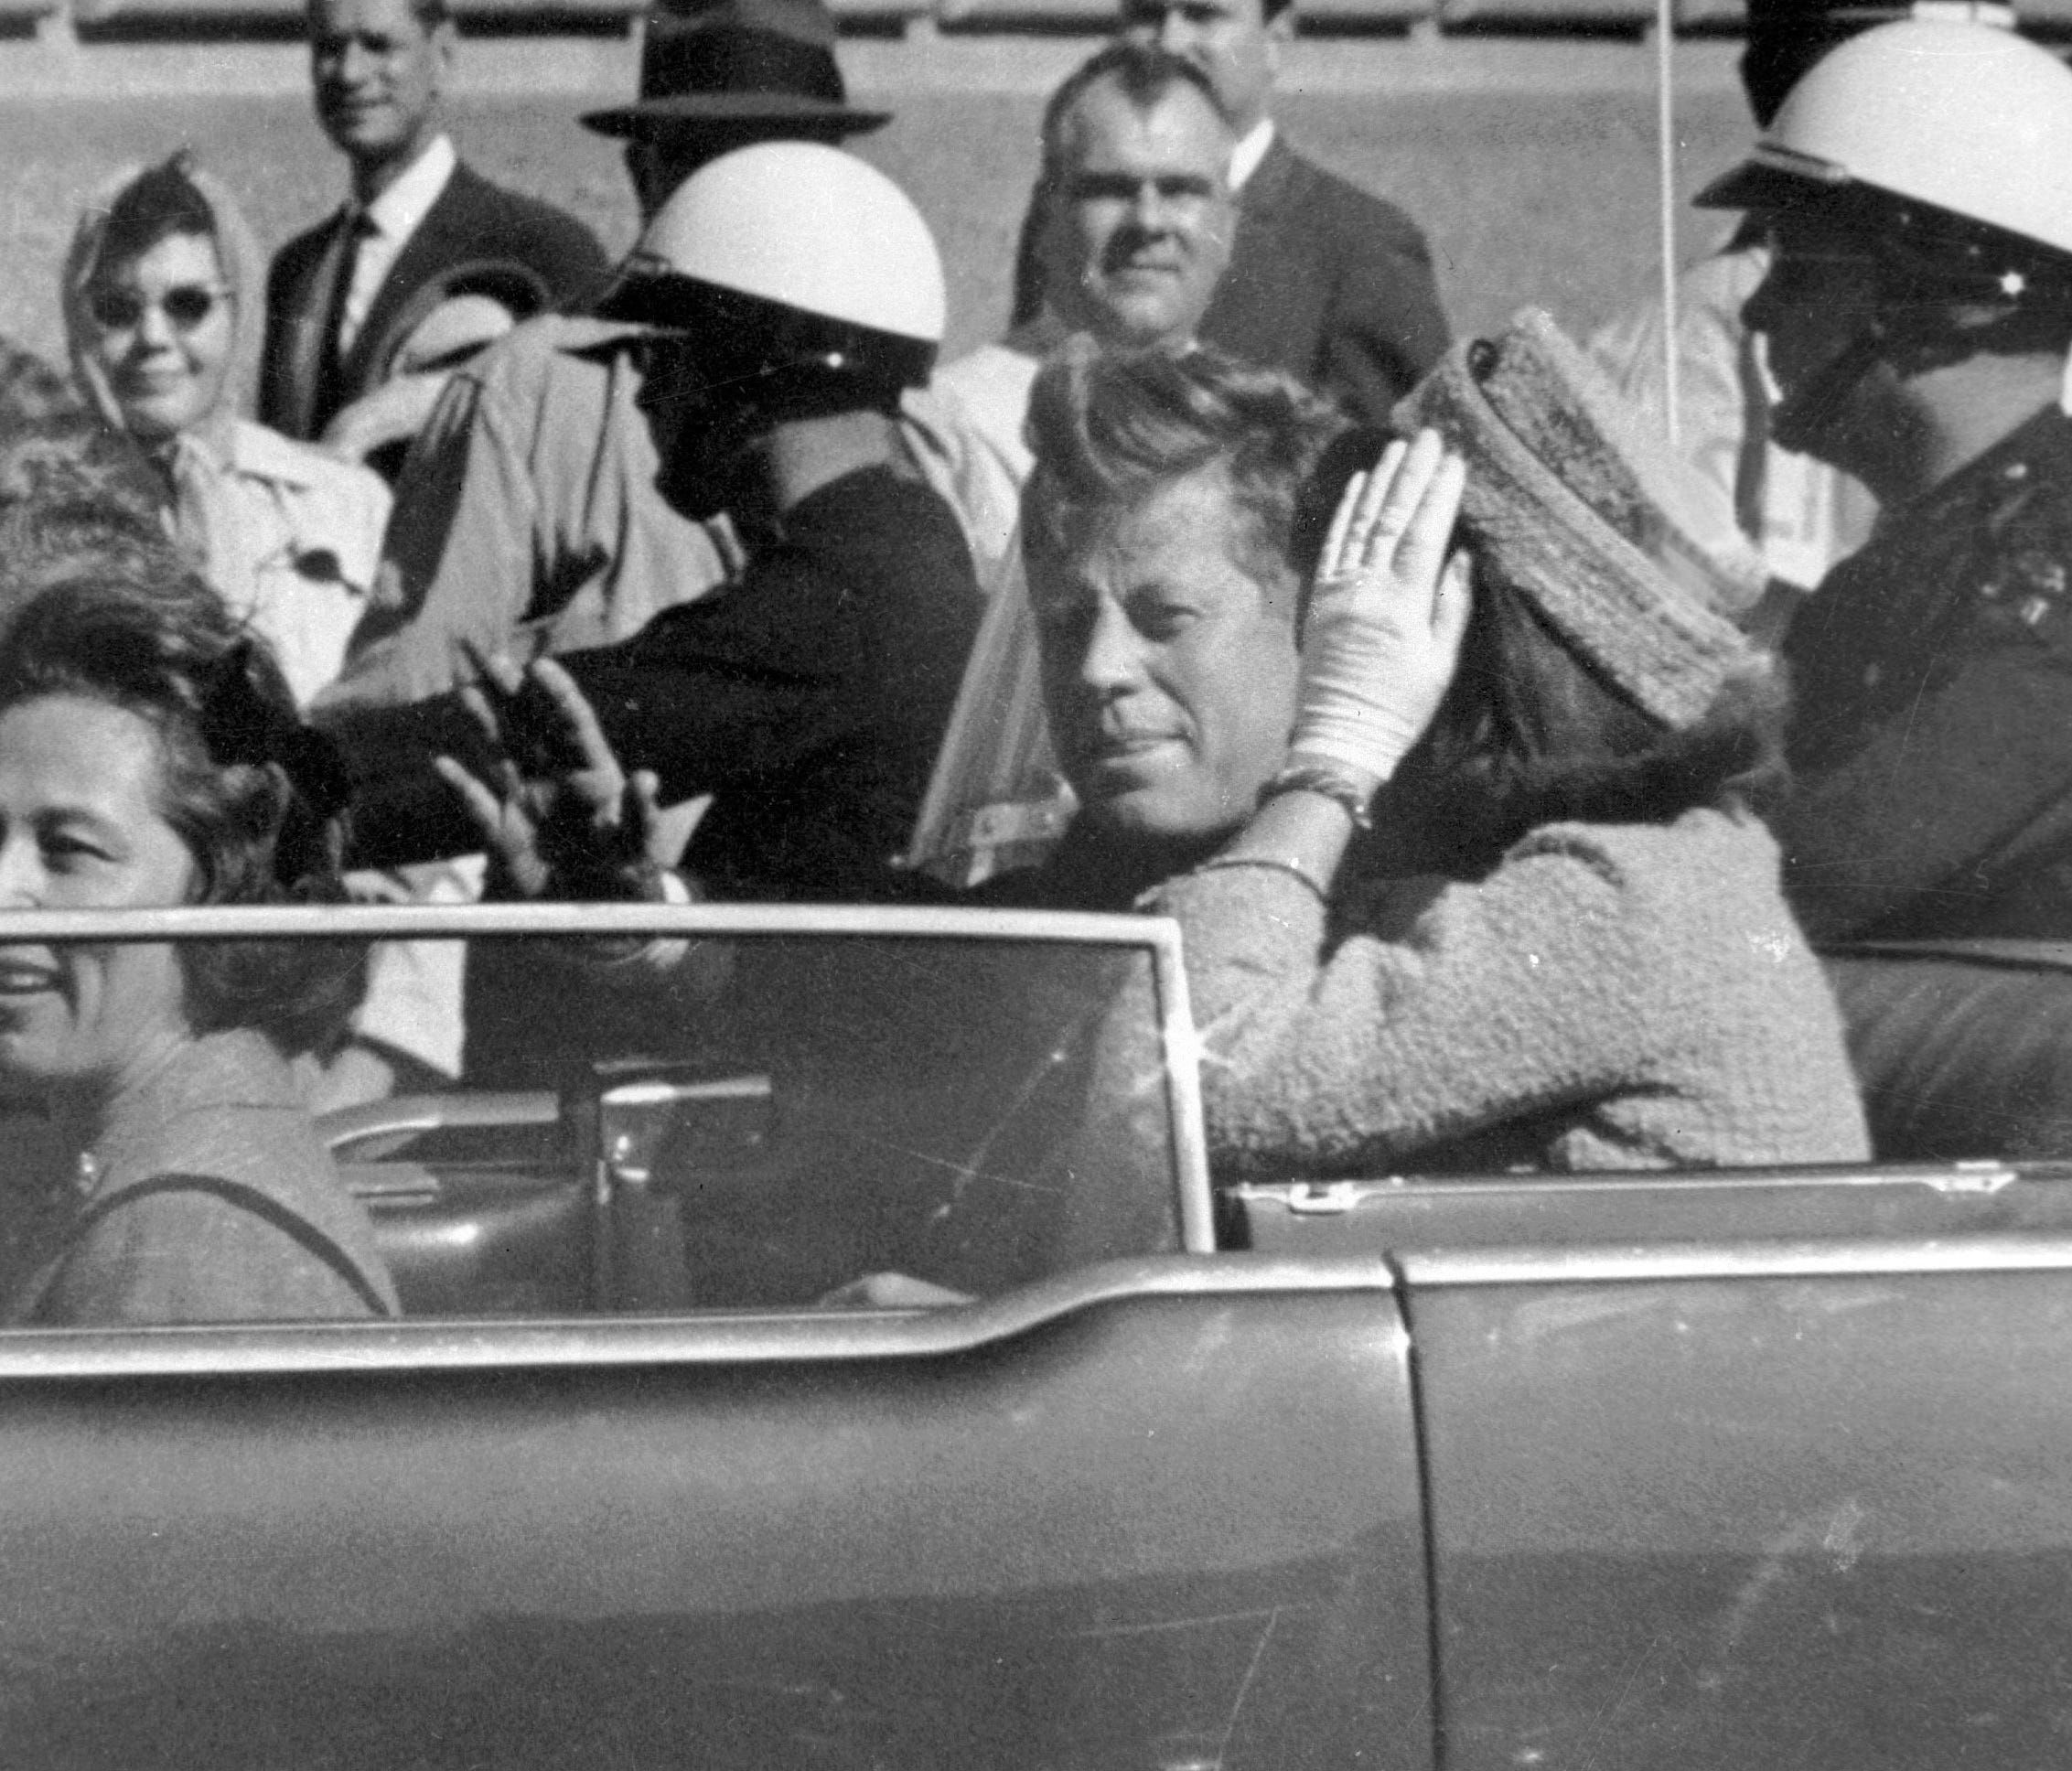 In this Nov. 22, 1963 file photo, President John F. Kennedy waves from his car in a motorcade in Dallas.